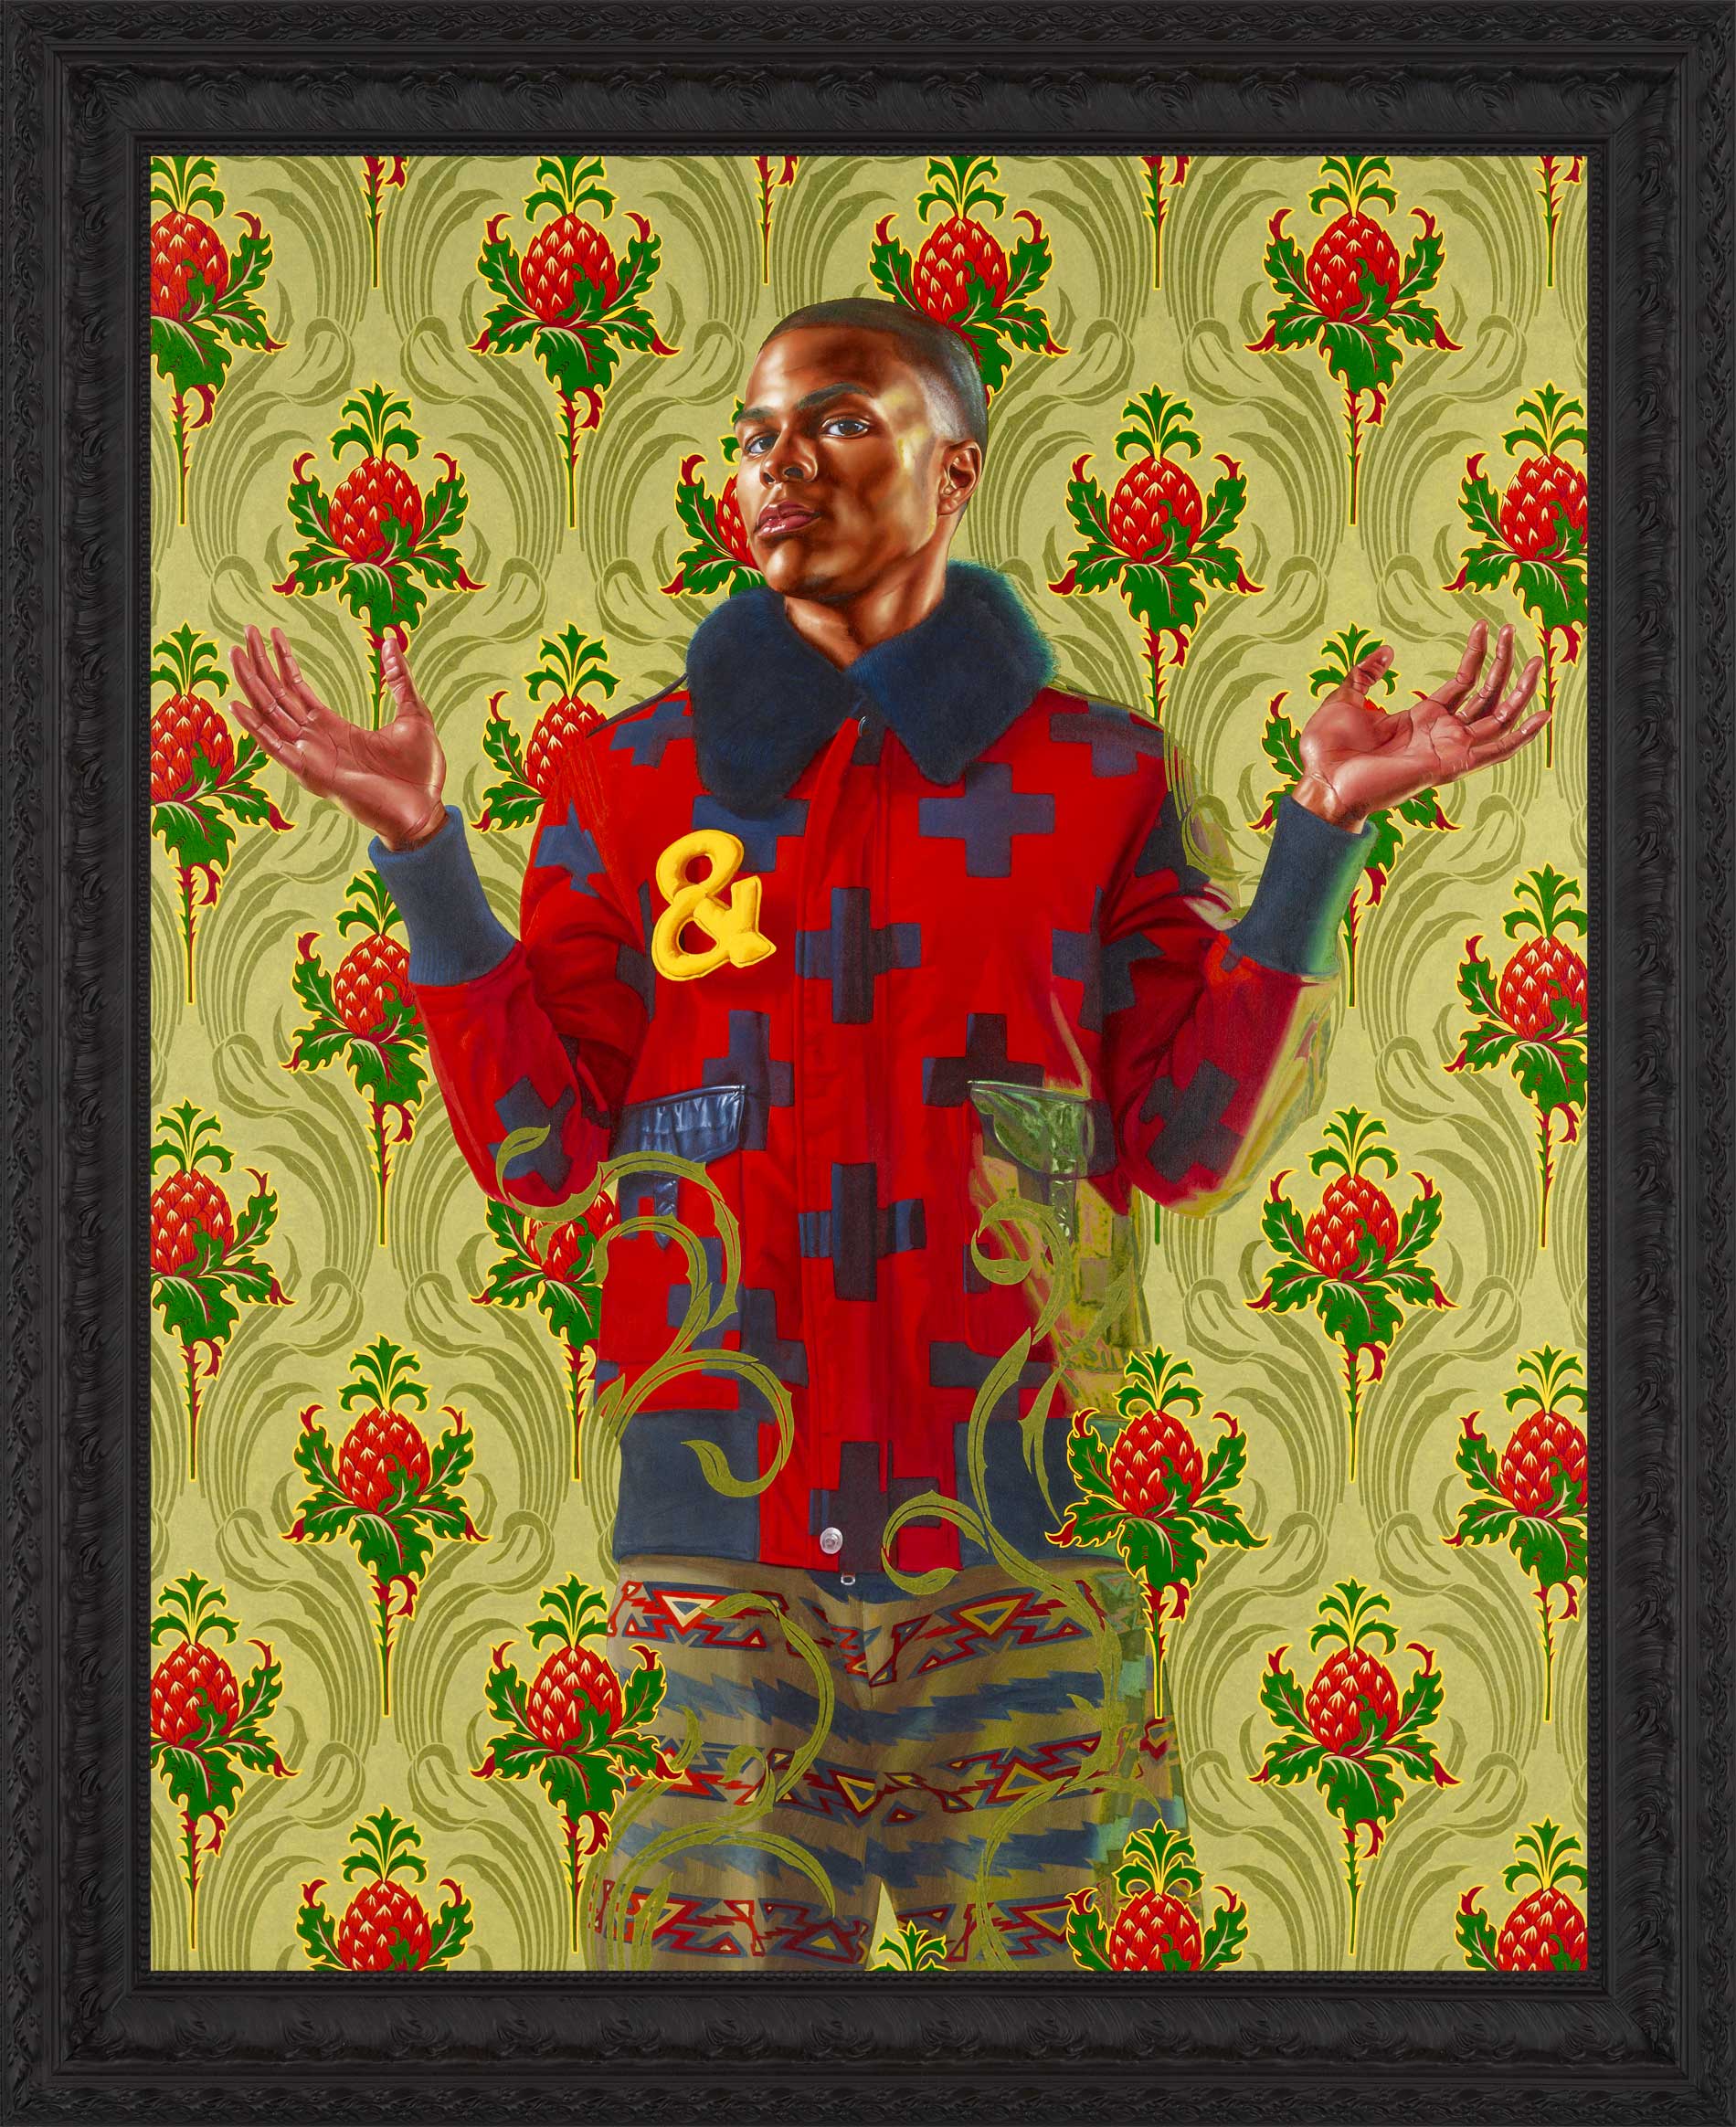 Kehinde Wiley | Selected Works: 2013 | Saint Clement, 2013, Oil on Canvas. | 1